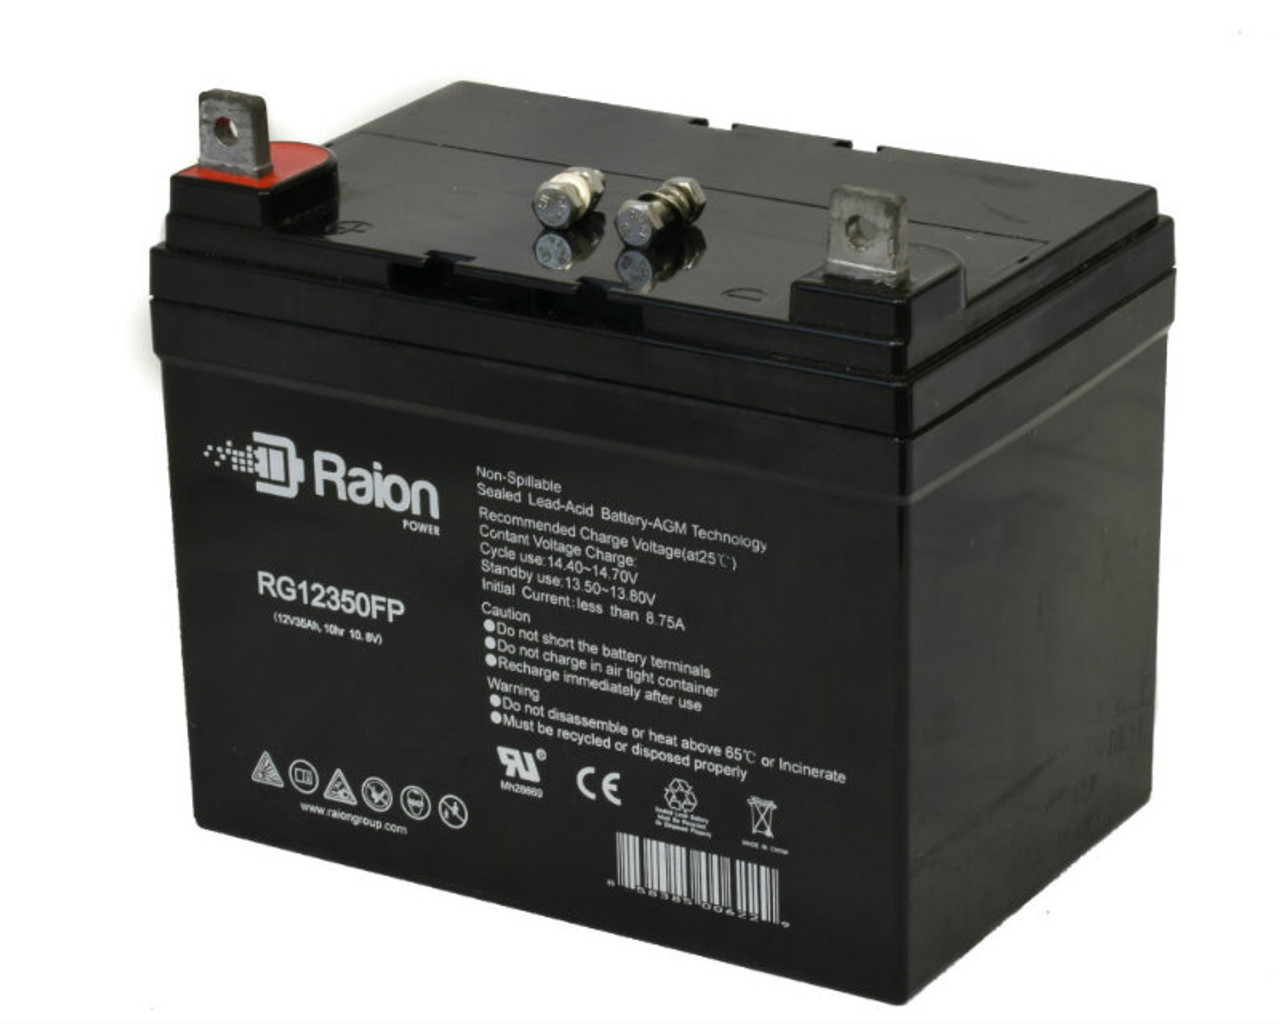 Raion Power Replacement 12V 35Ah RG12350FP Battery for Sabre 1538HS